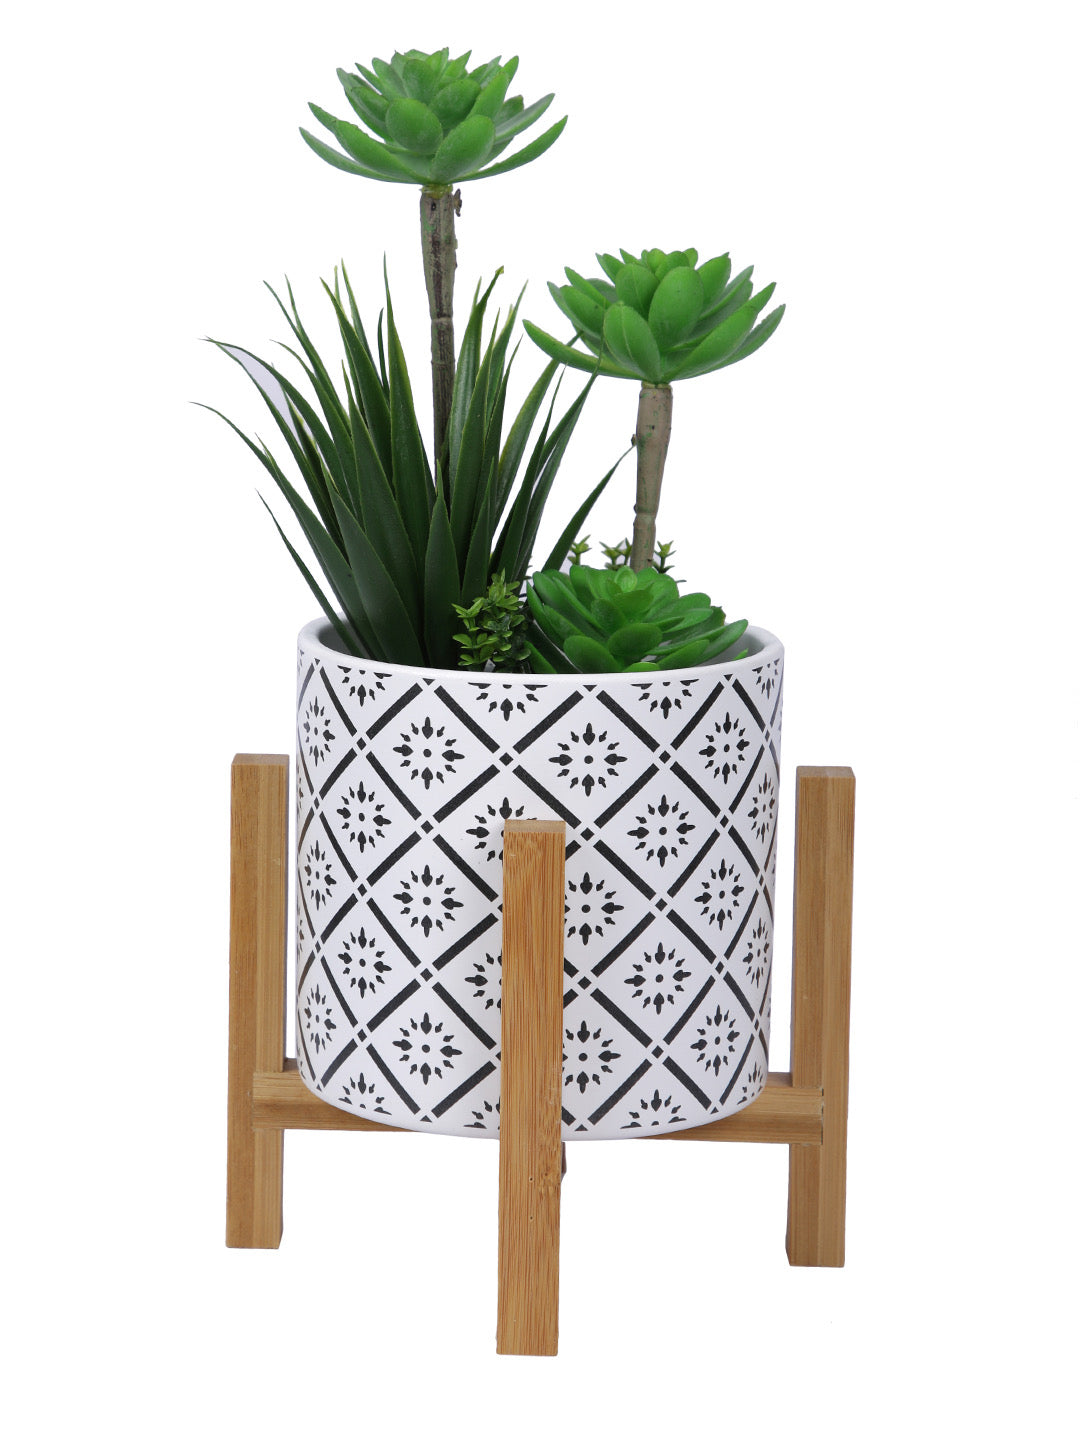 Ceramic Matte Planter with Wooden stand - Default Title (CHC22389B)